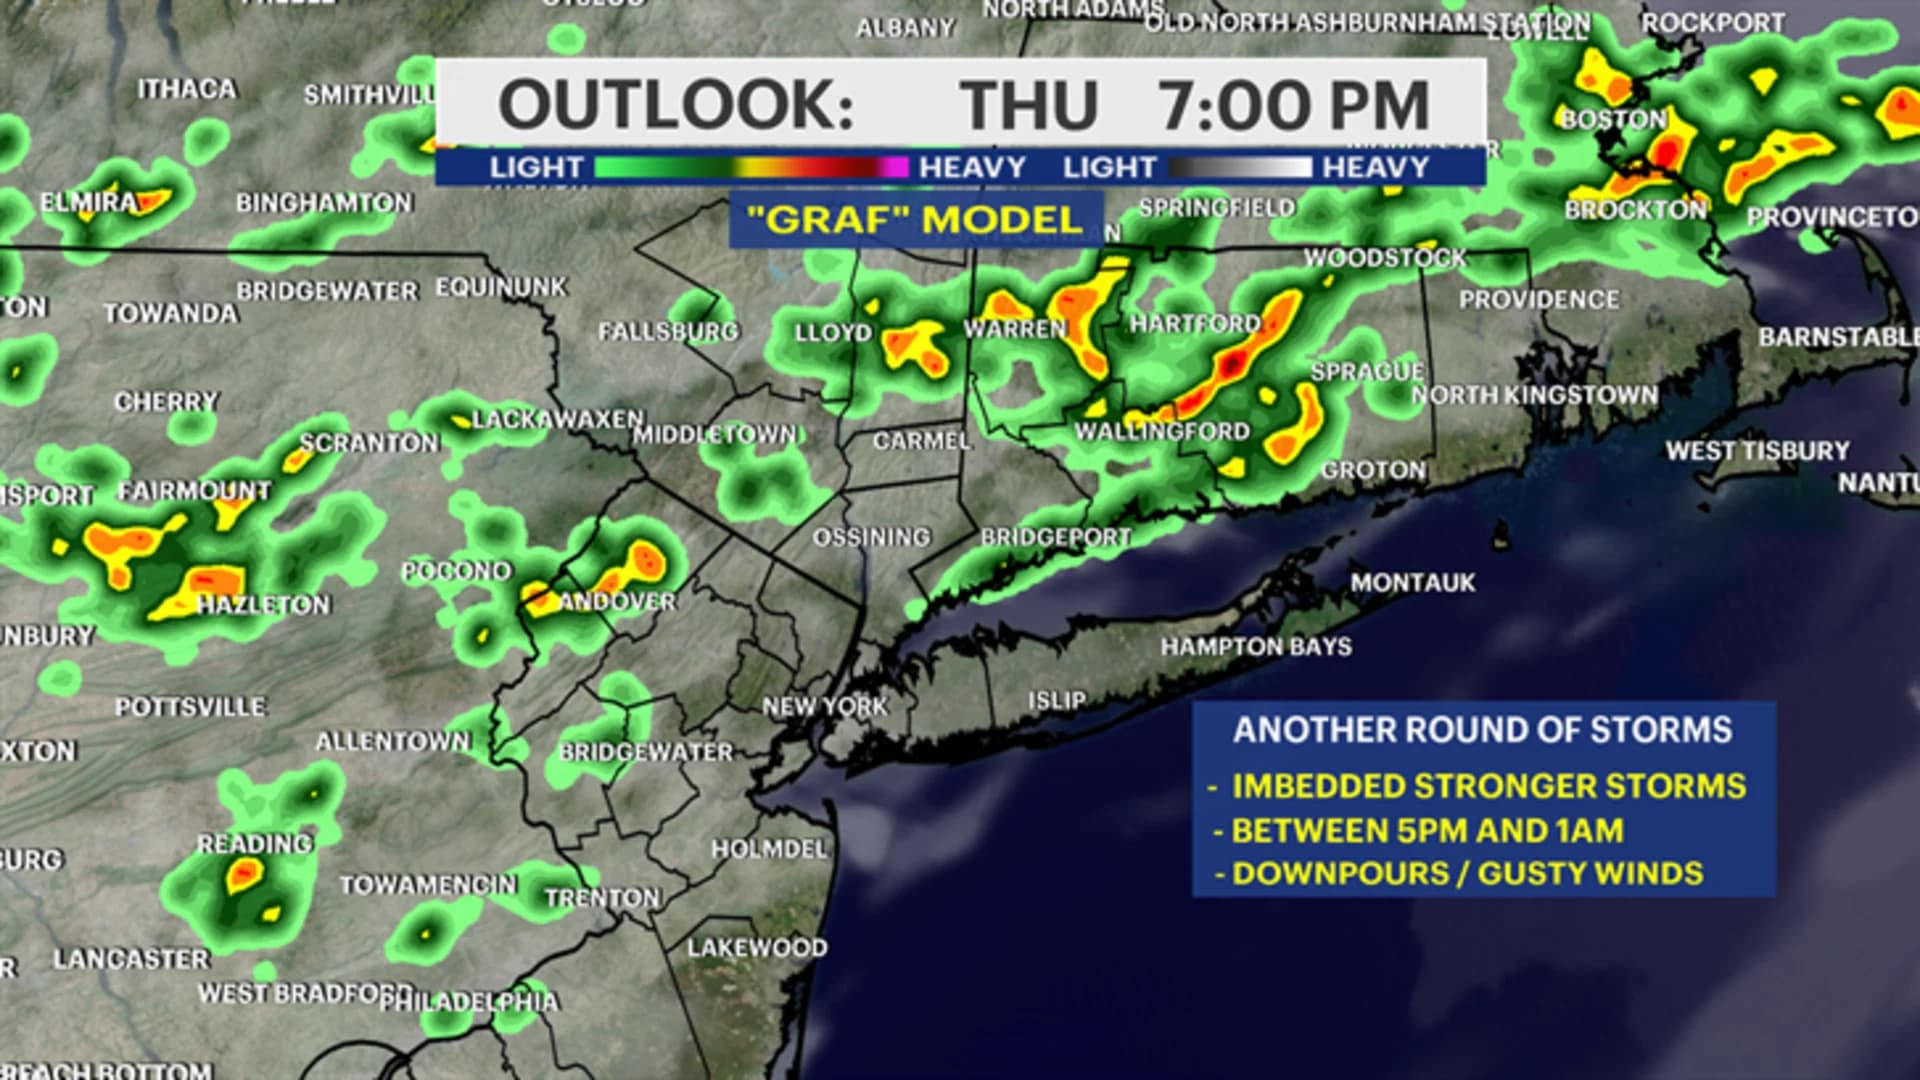 Heavy rain from evening thunderstorms could cause flooding